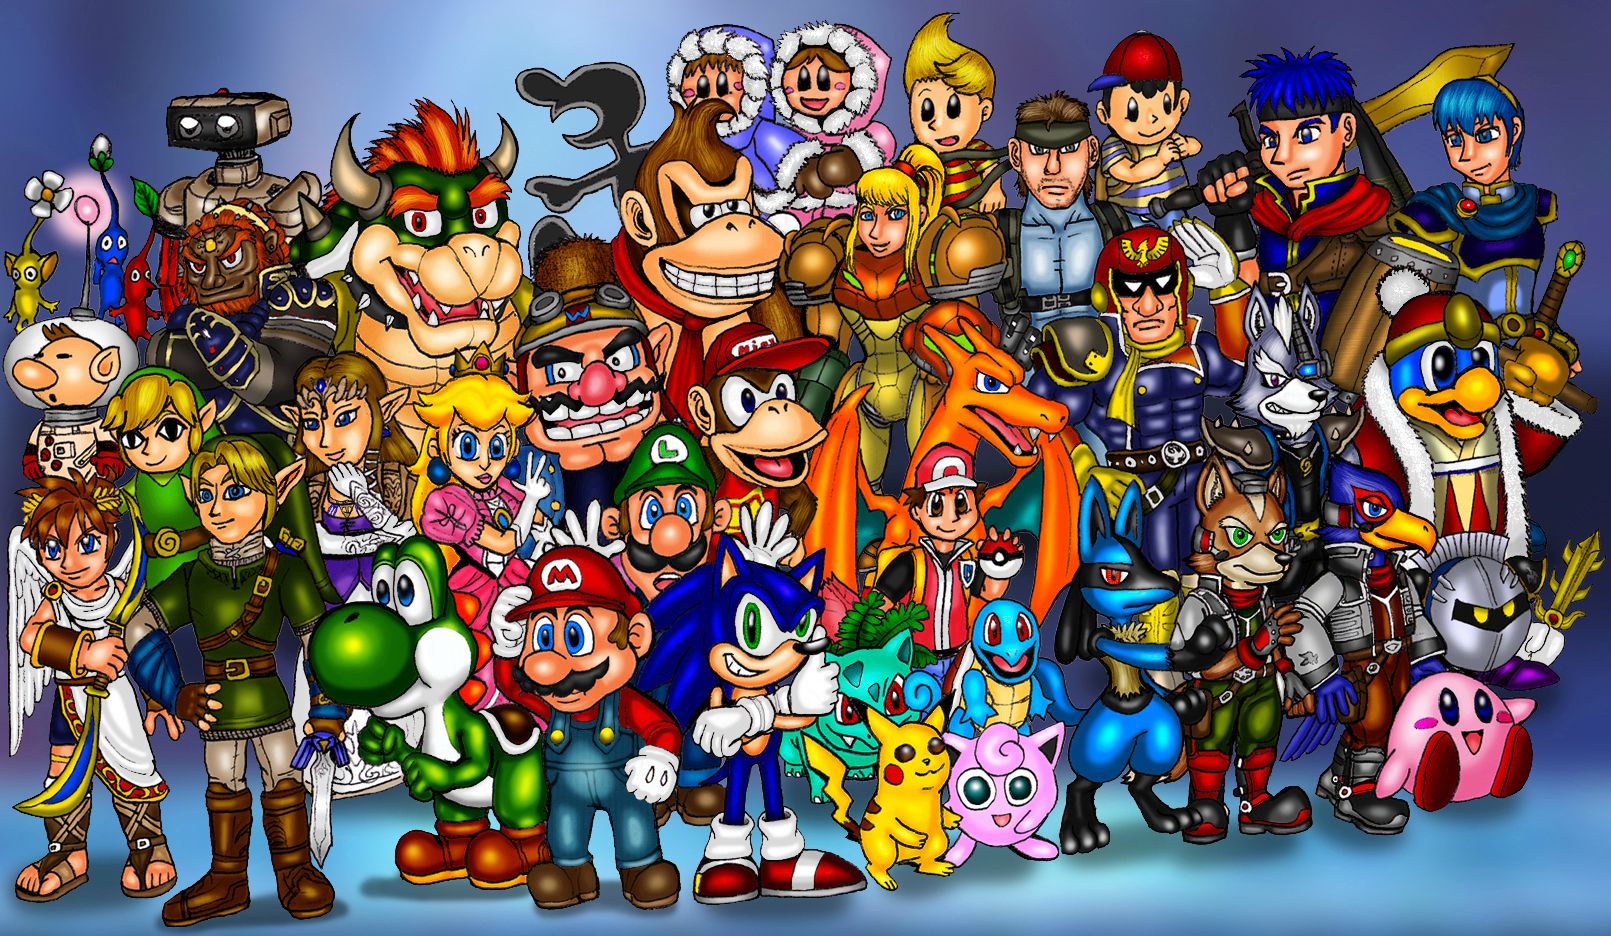 video game characters togetherSome of the more well known video game